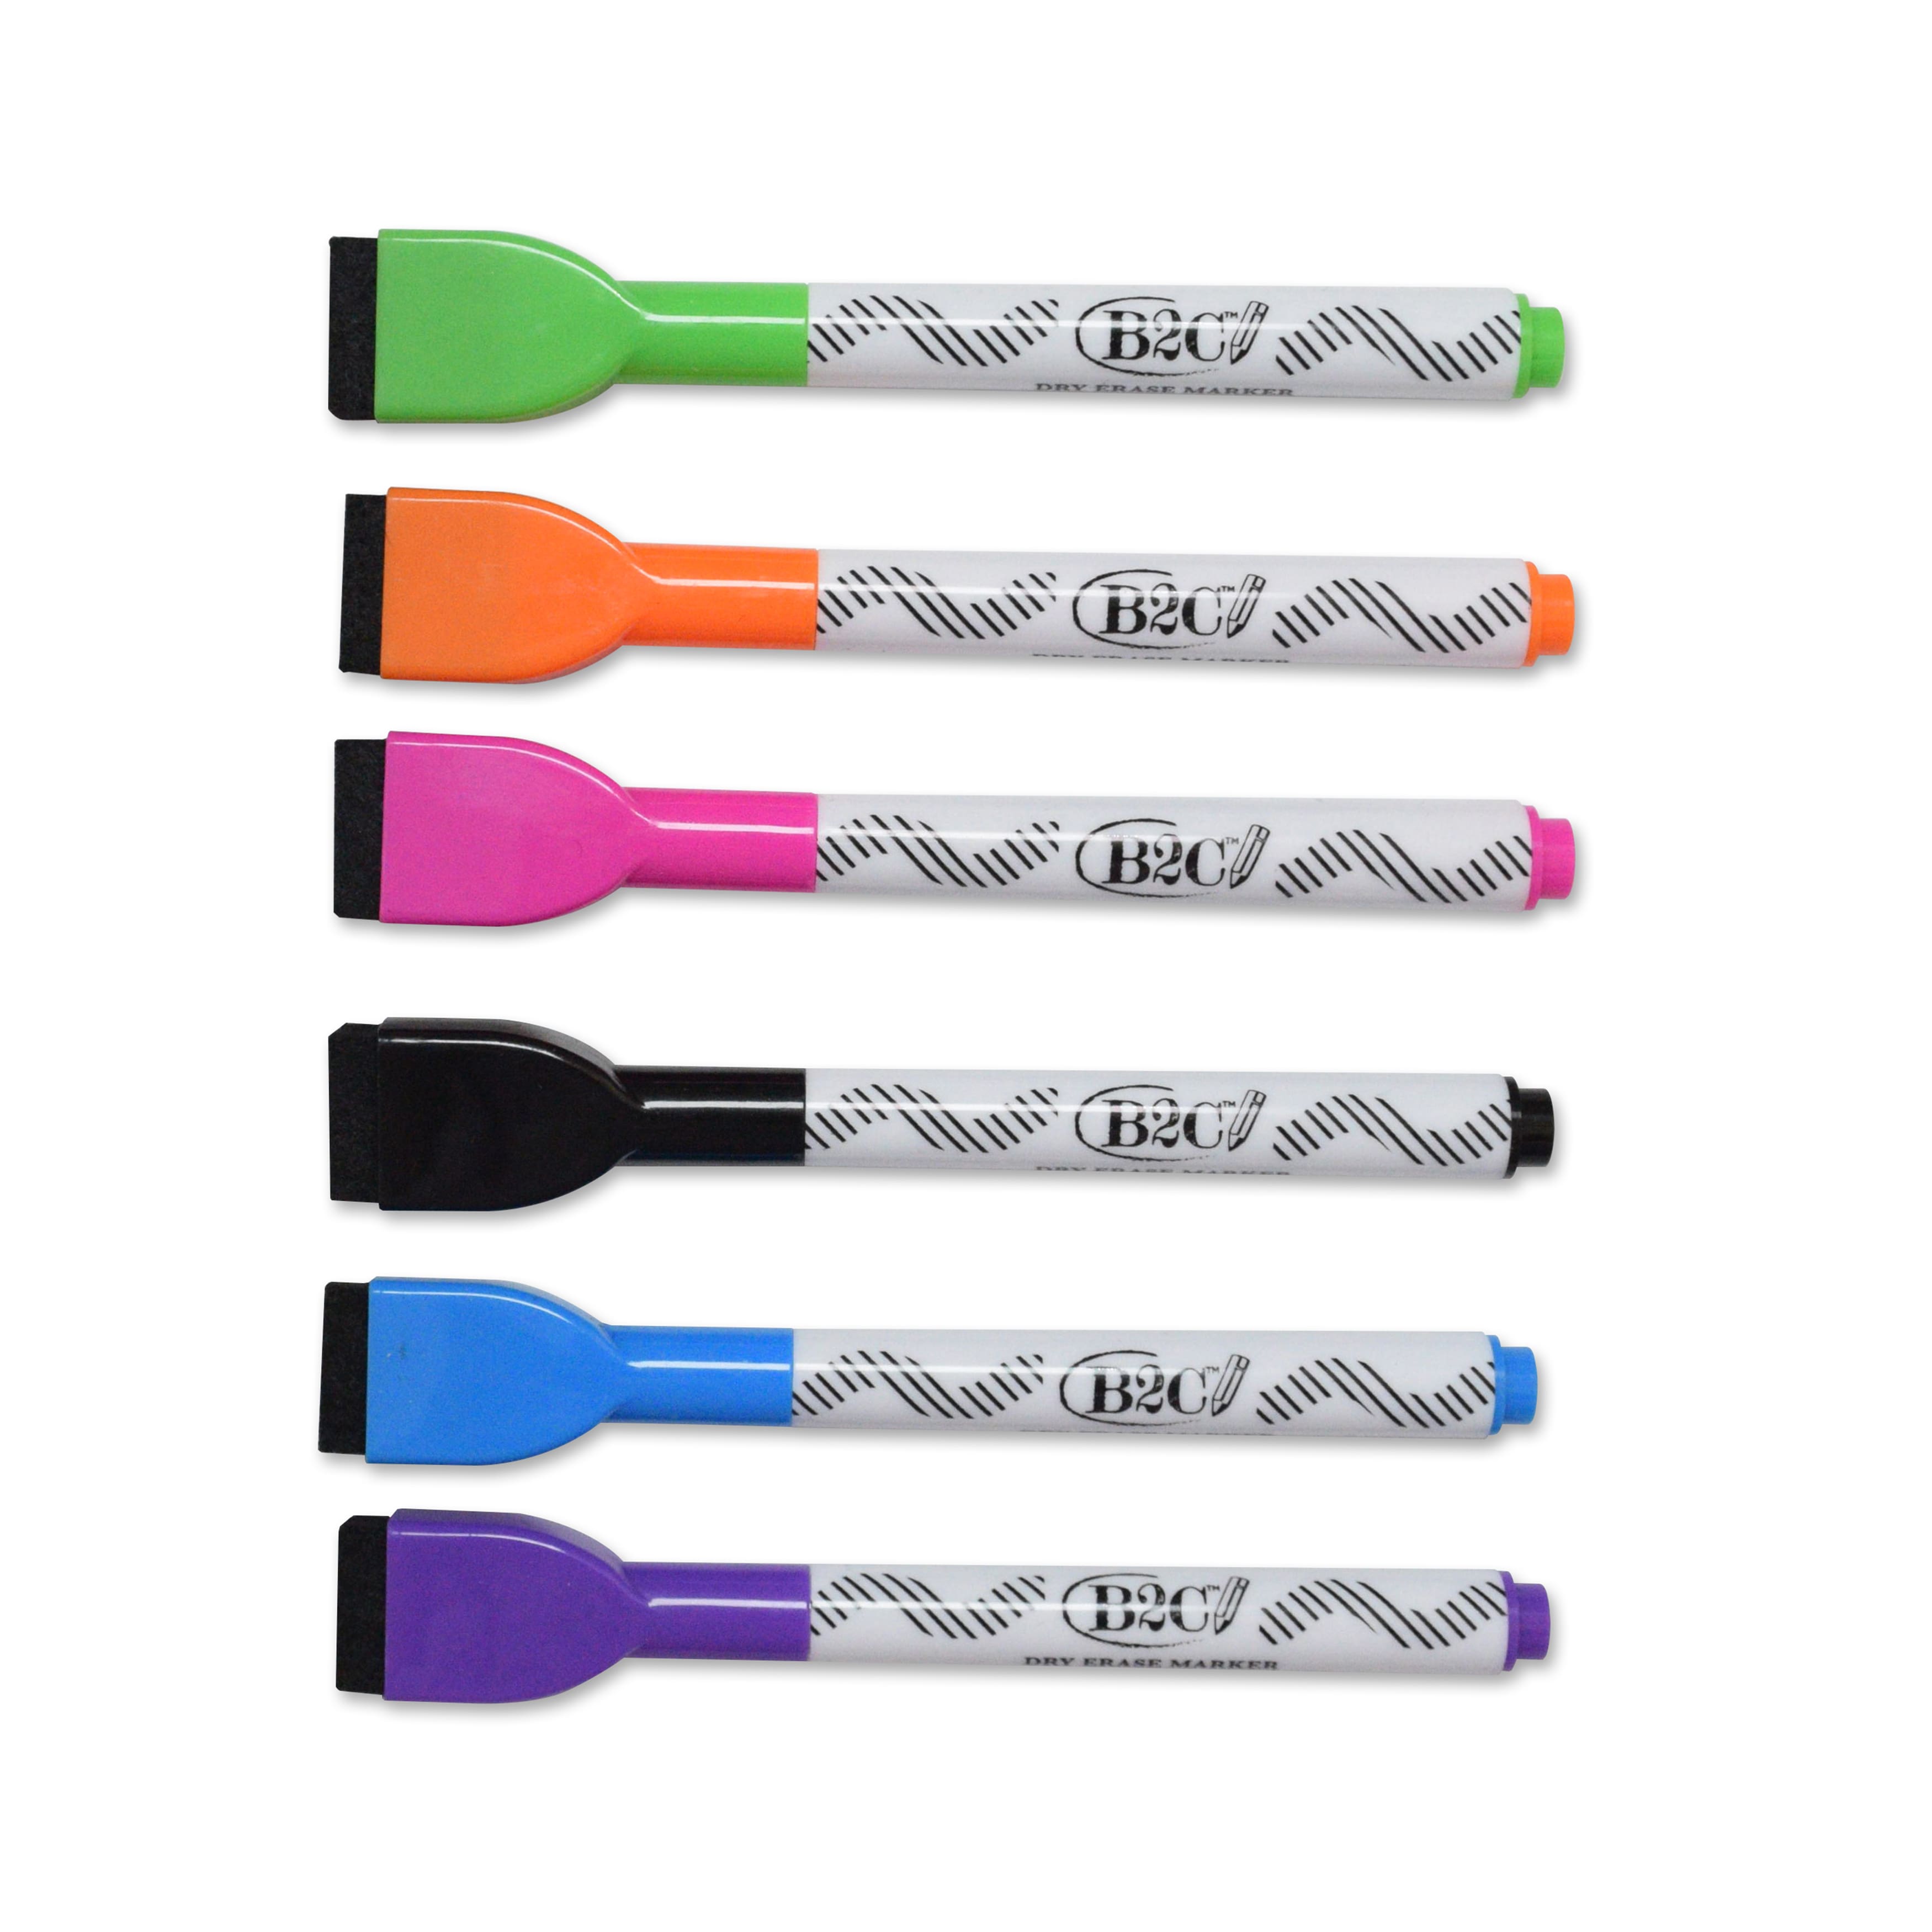 Arteza Dry Erase Markers, Chisel Tip, 12 Assorted Colors for School - 52  Pack